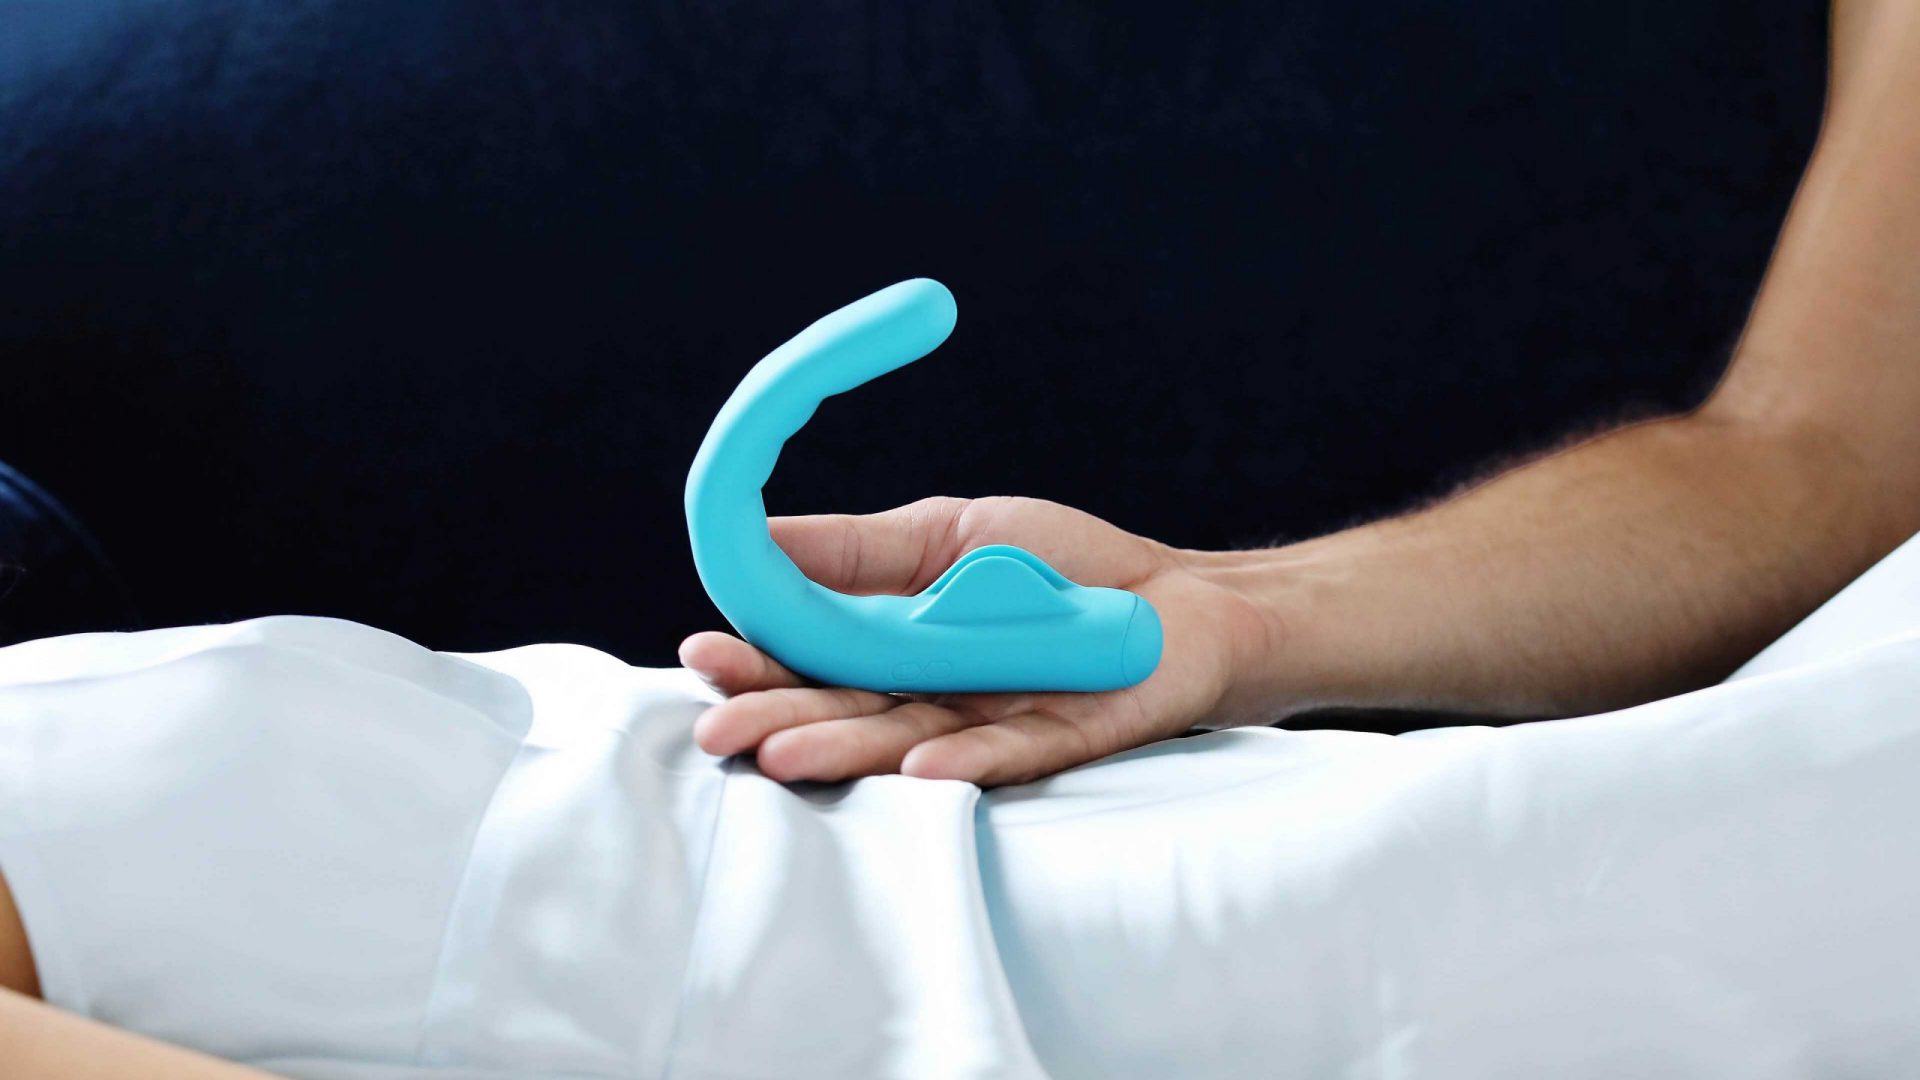 Sex toy designs 10 products for you to get inspired DesignWanted picture